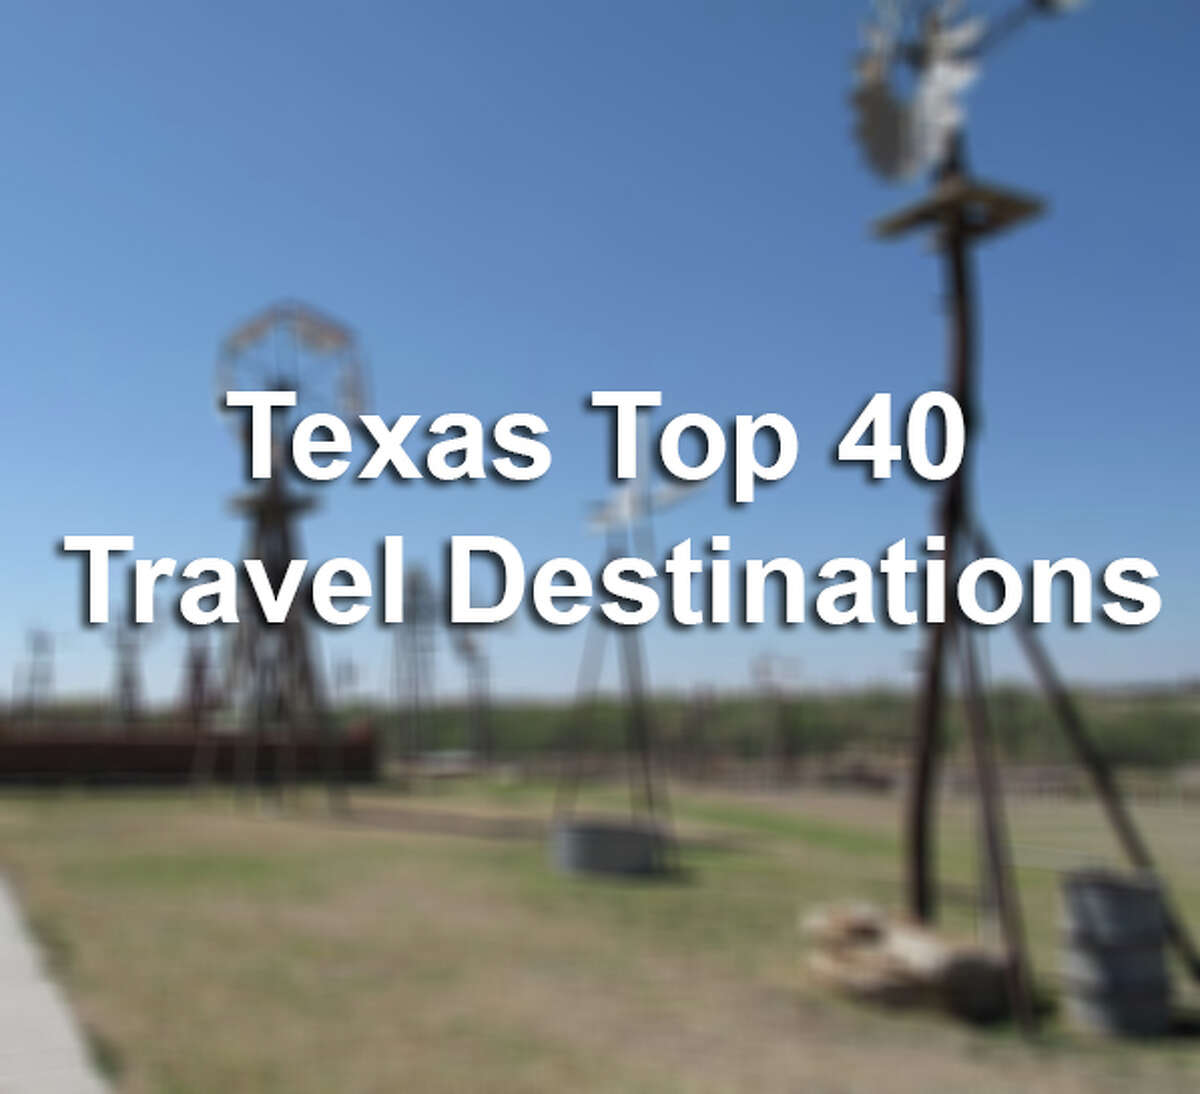 With the combination of culture, theme parks and the famed River Walk, voters named San Antonio the top travel destination in the state, Texas Highways Magazine announced Monday. The magazine hosted the year-long competition that ranked 40 best travel sites, and the Alamo City was able to claim, the top spot over well-known sites such as Big Bend, Padre Island and Garner State Park. Click through the slideshow above to see the top 40 travel destinations, named by Texas Highway Magazine.